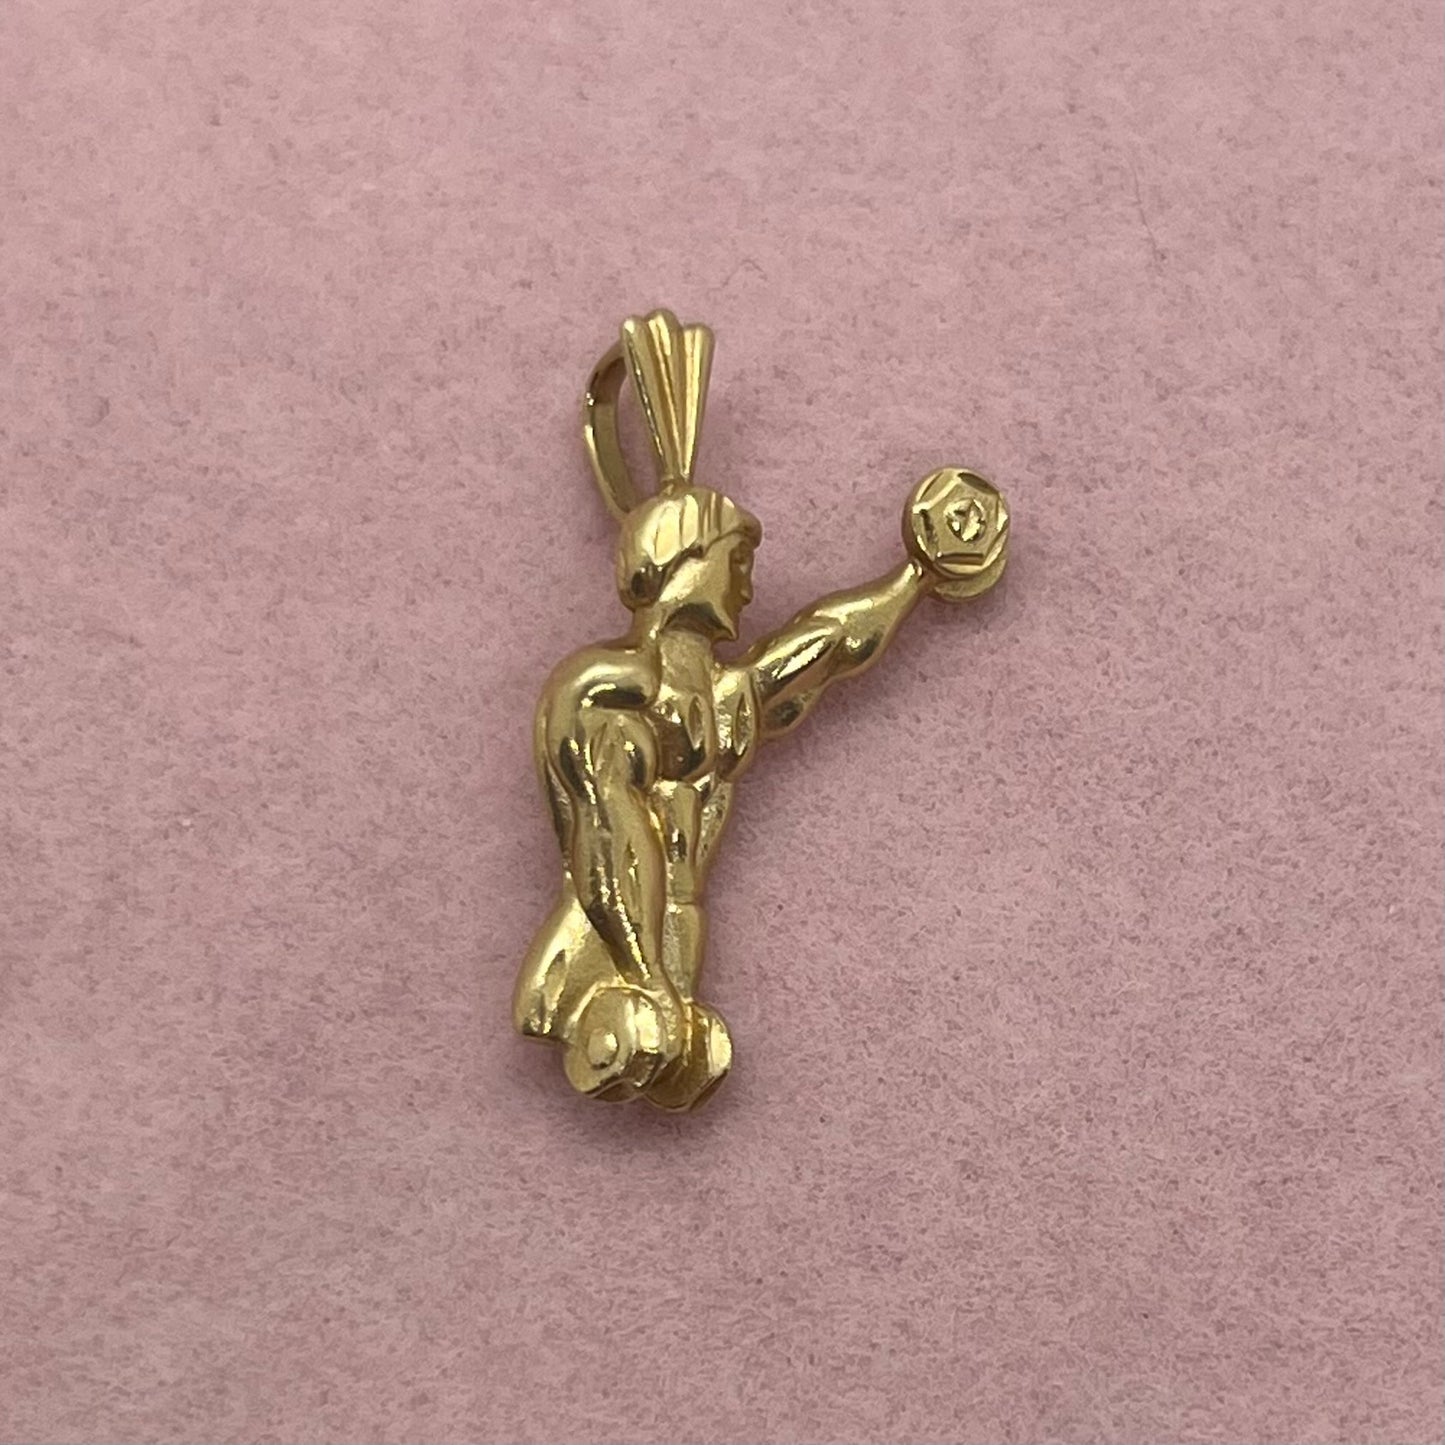 Body Builder Pendant by Michael Anthony